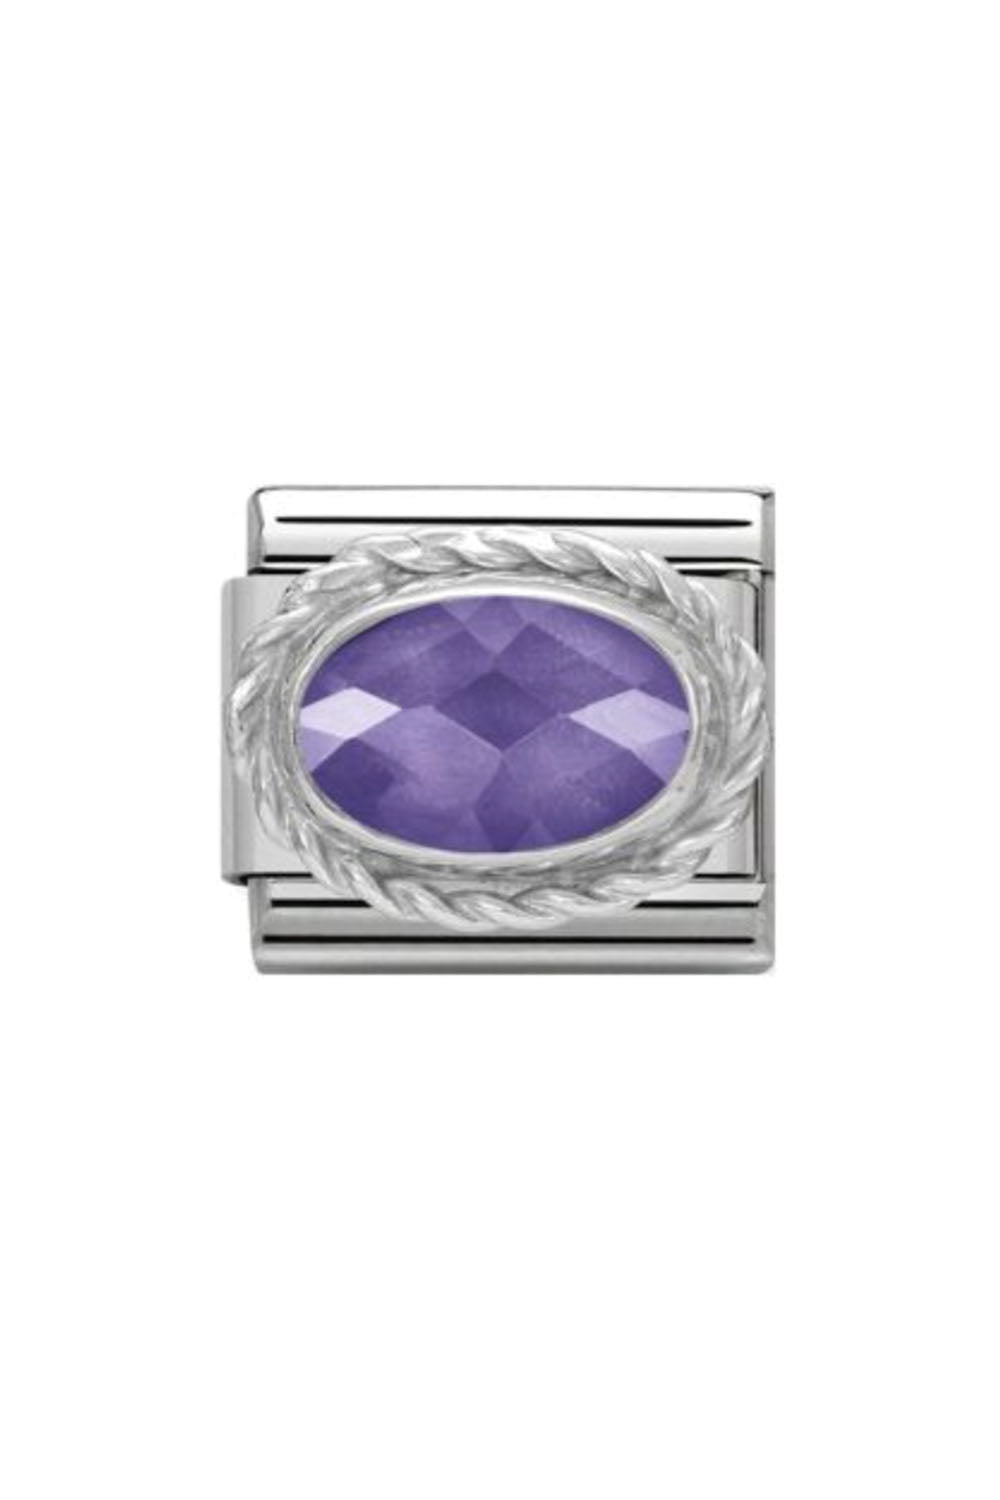 CZ faceted with 925 sterling silver setting and CZ Purple